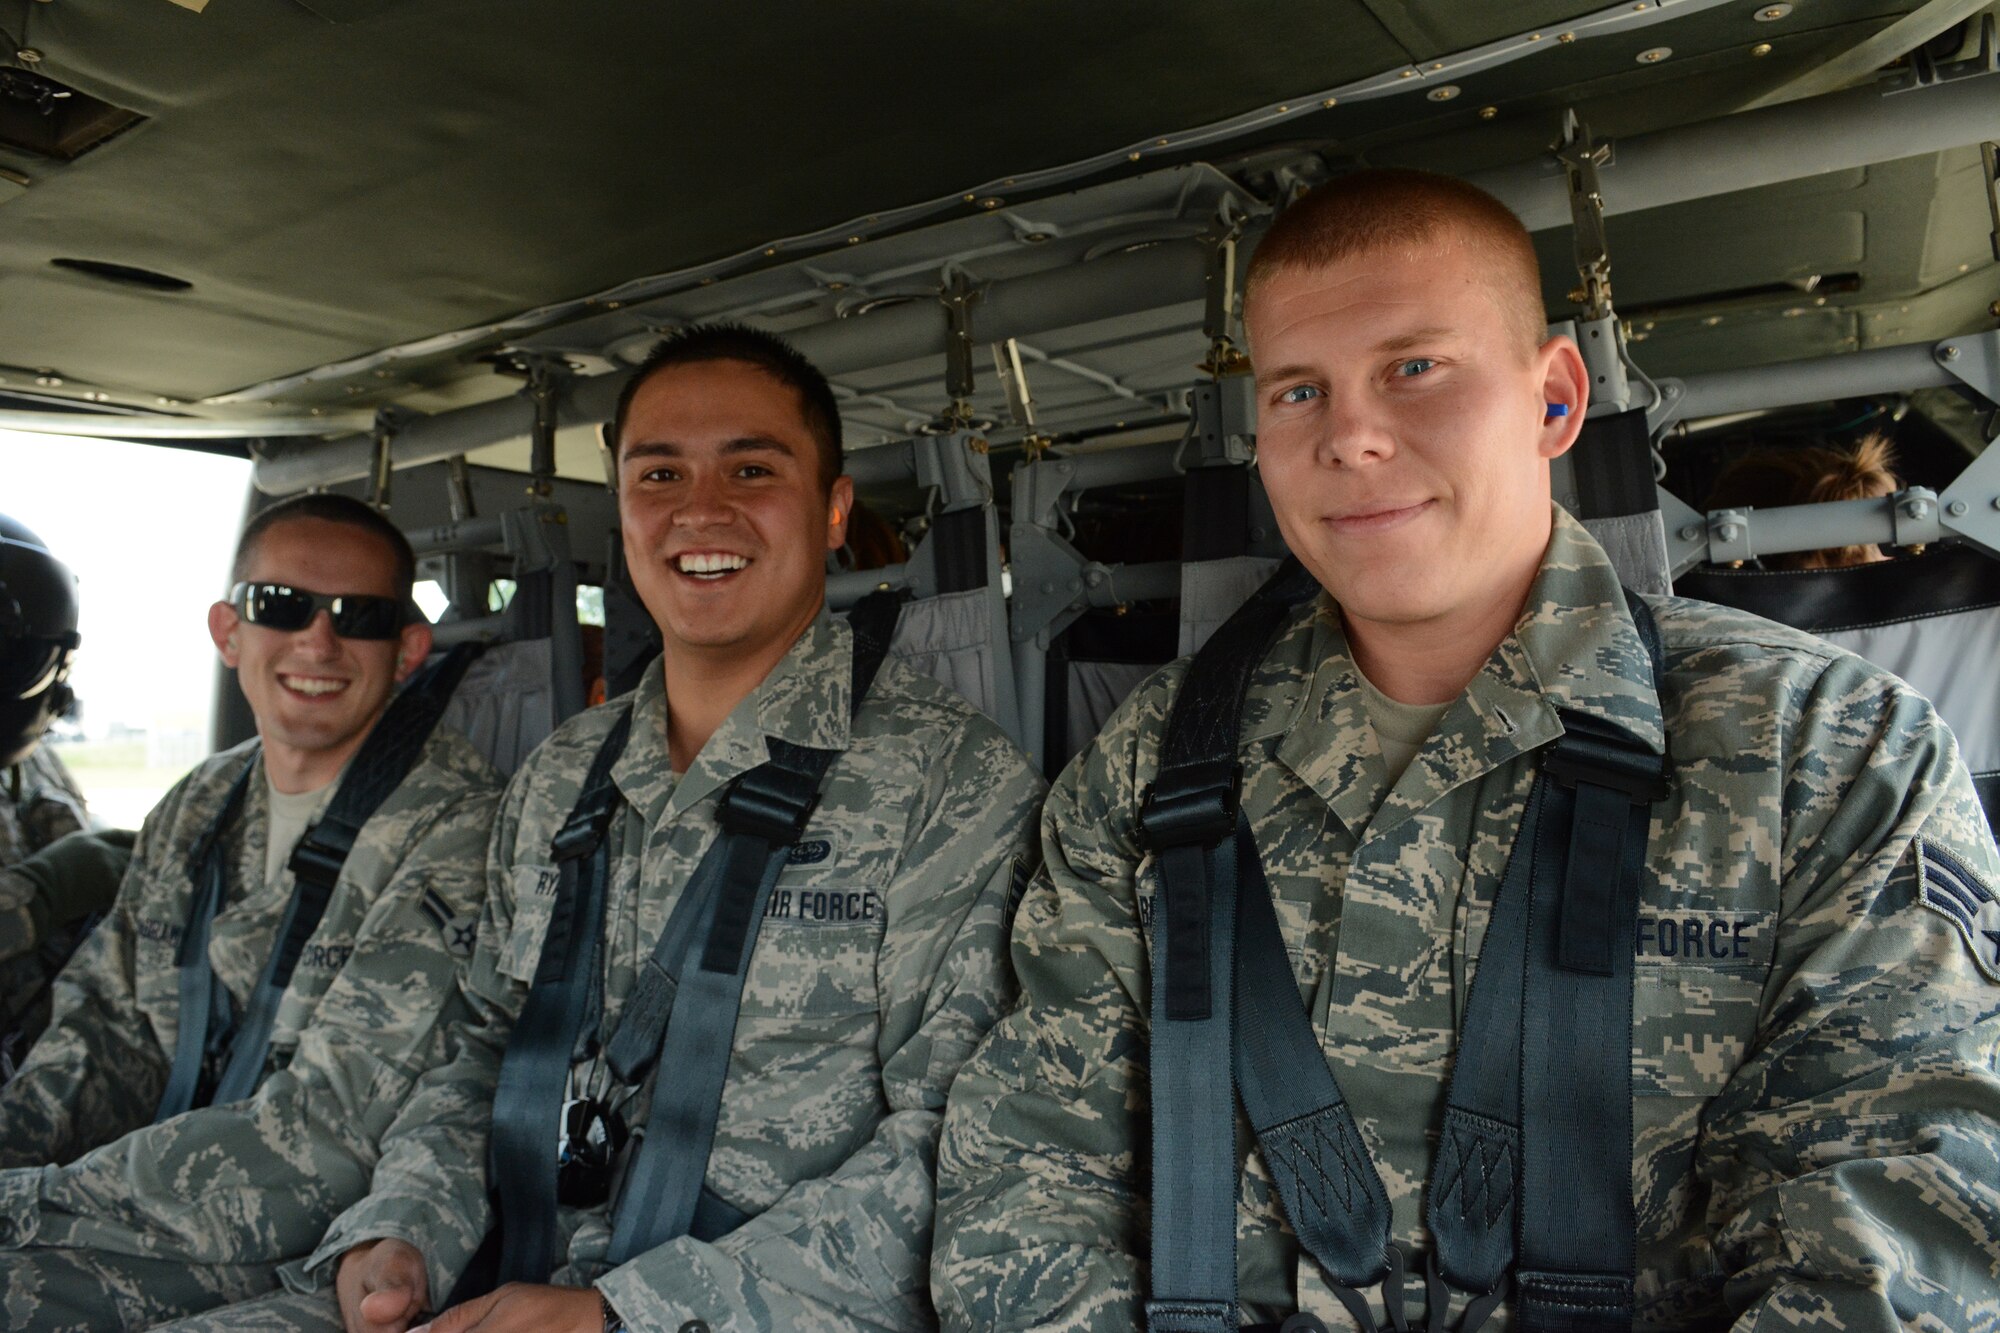 Airmen from across the state of Wisconsin prepare for their UH-60 Black Hawk transport from Madison to Volk Field Air National Guard Base on July 29, 2014. The Airmen were selected to participate in a three-day Junior Enlisted Opportunity Program headed up by the state’s first sergeants. They spend three days touring the 115th Fighter Wing, Volk Field and the 128th Air Refueling Wing to gain a better understanding of each bases’ mission. (Air National Guard photo by Senior Airman Andrea F. Liechti)